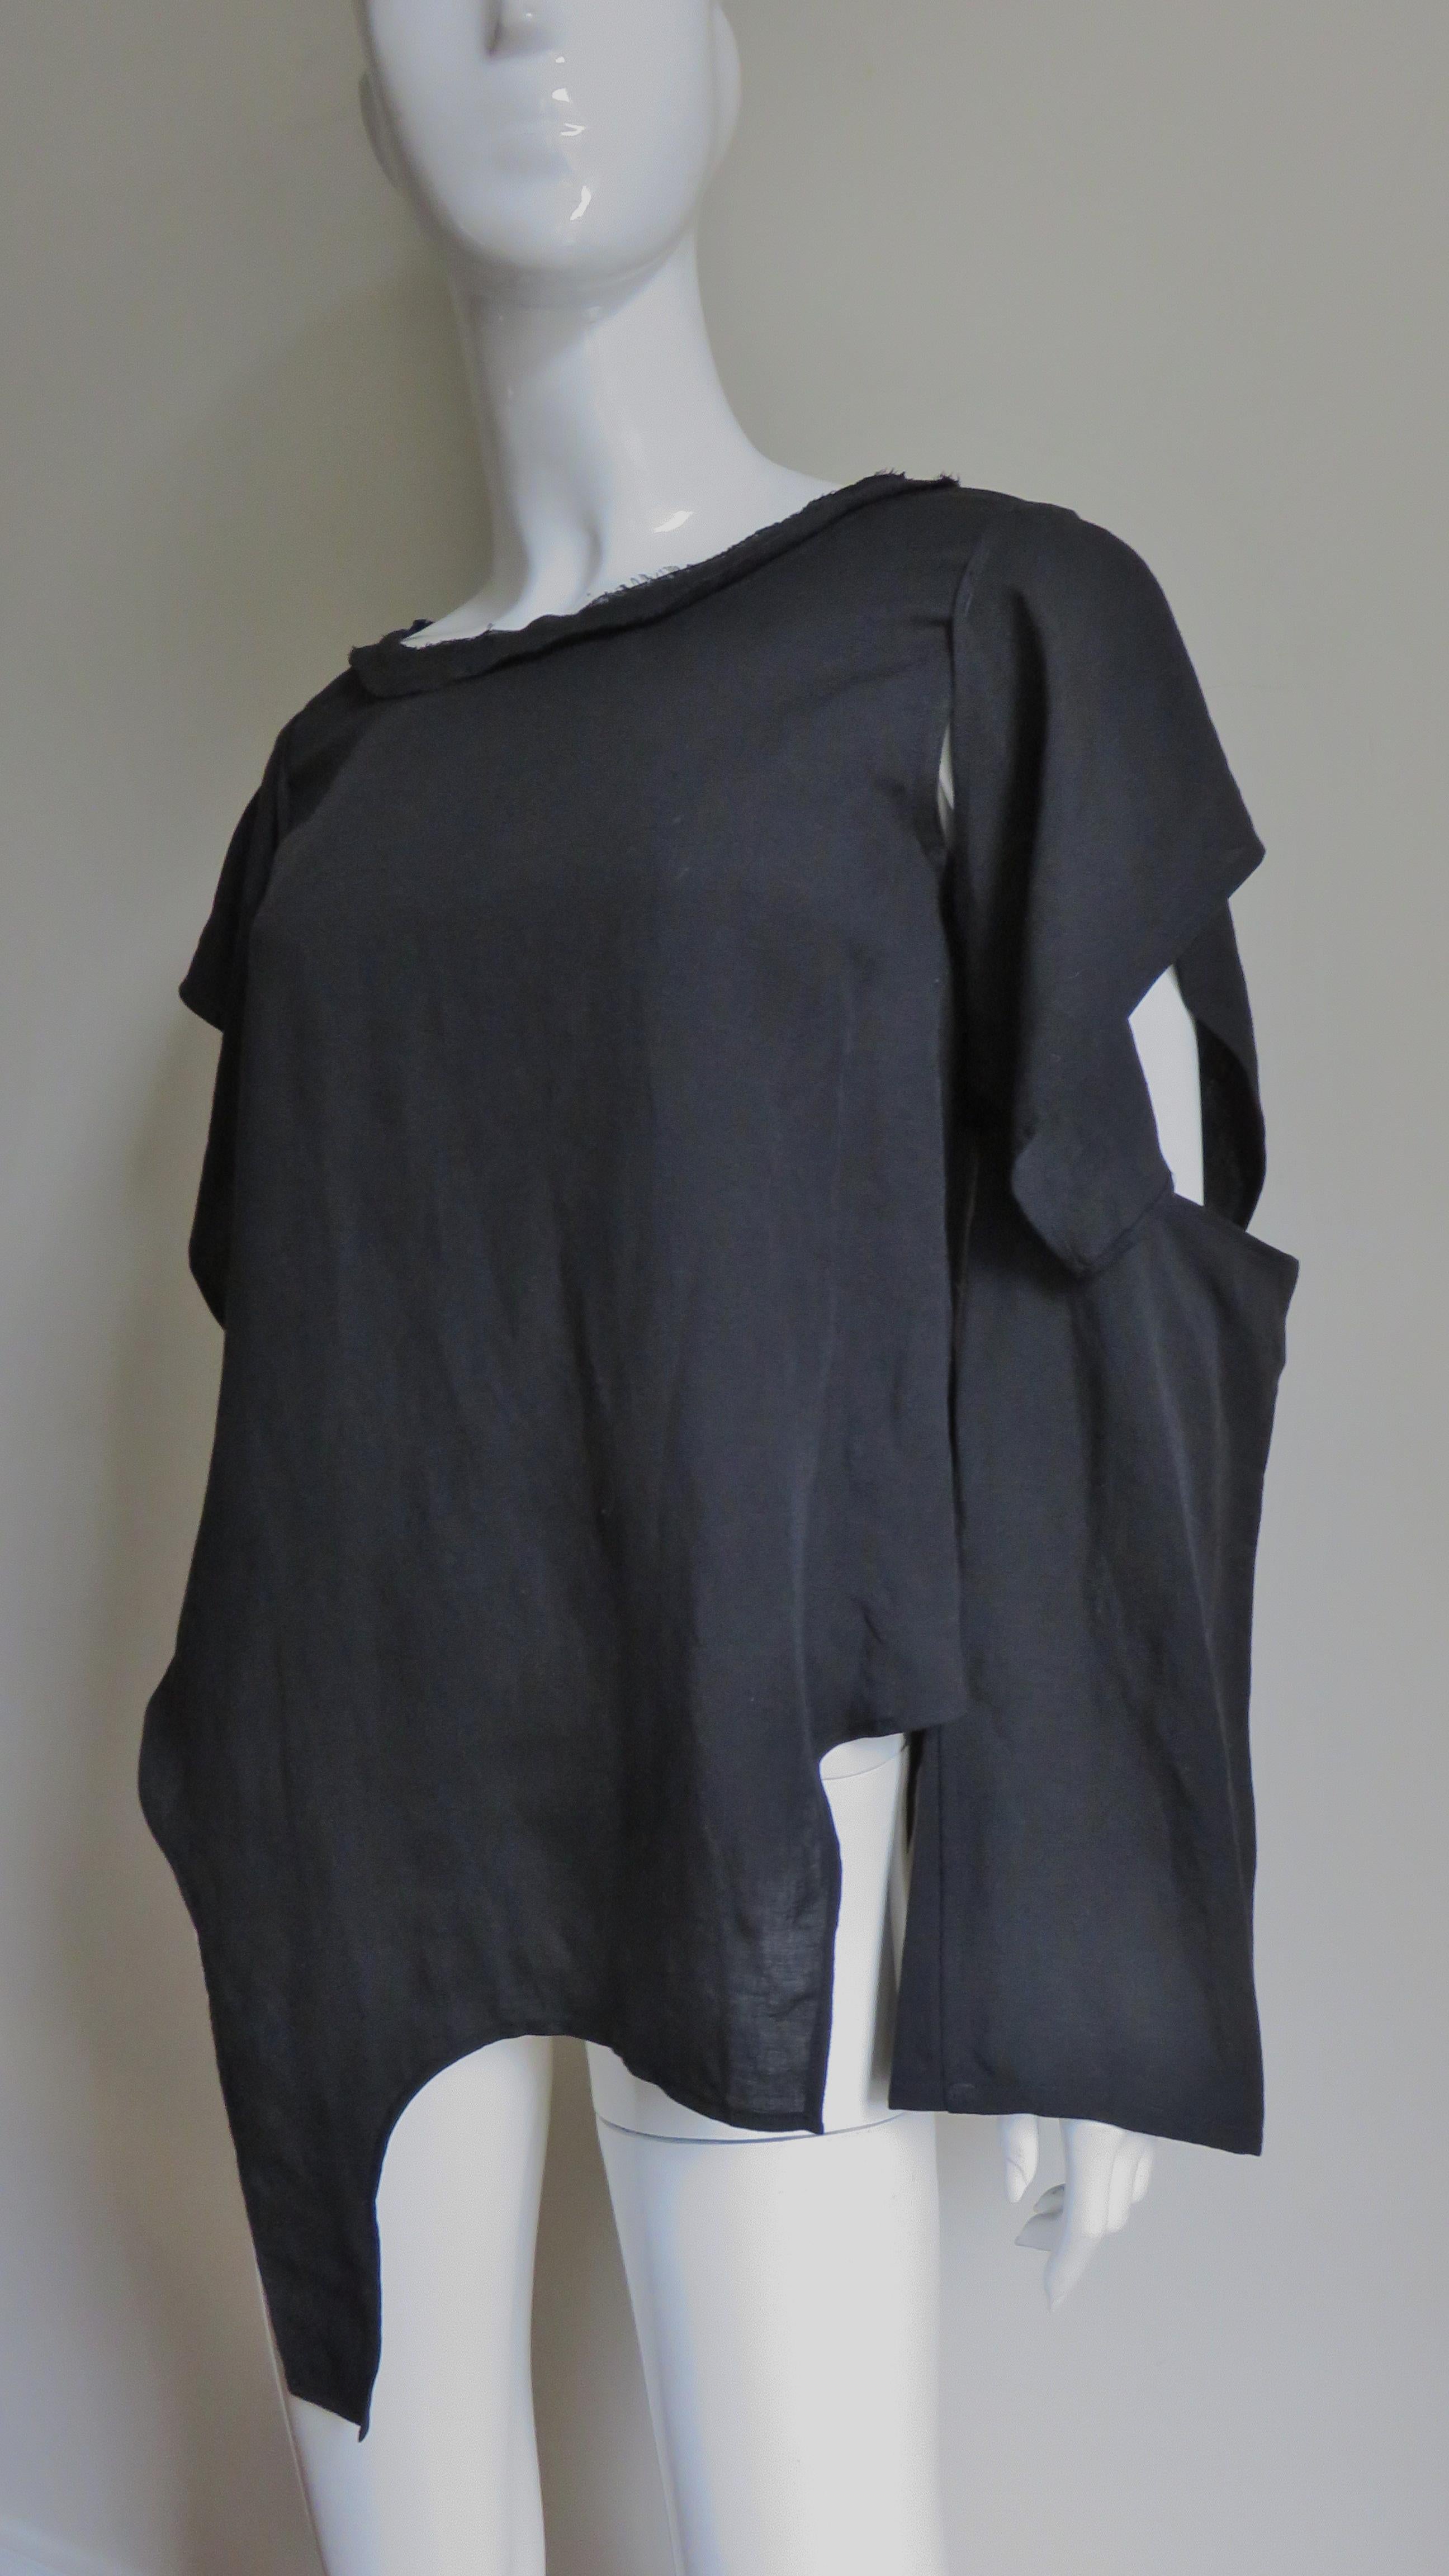 Yohji Yamamoto Cut out Asymmetric Top Shirt In Good Condition For Sale In Water Mill, NY